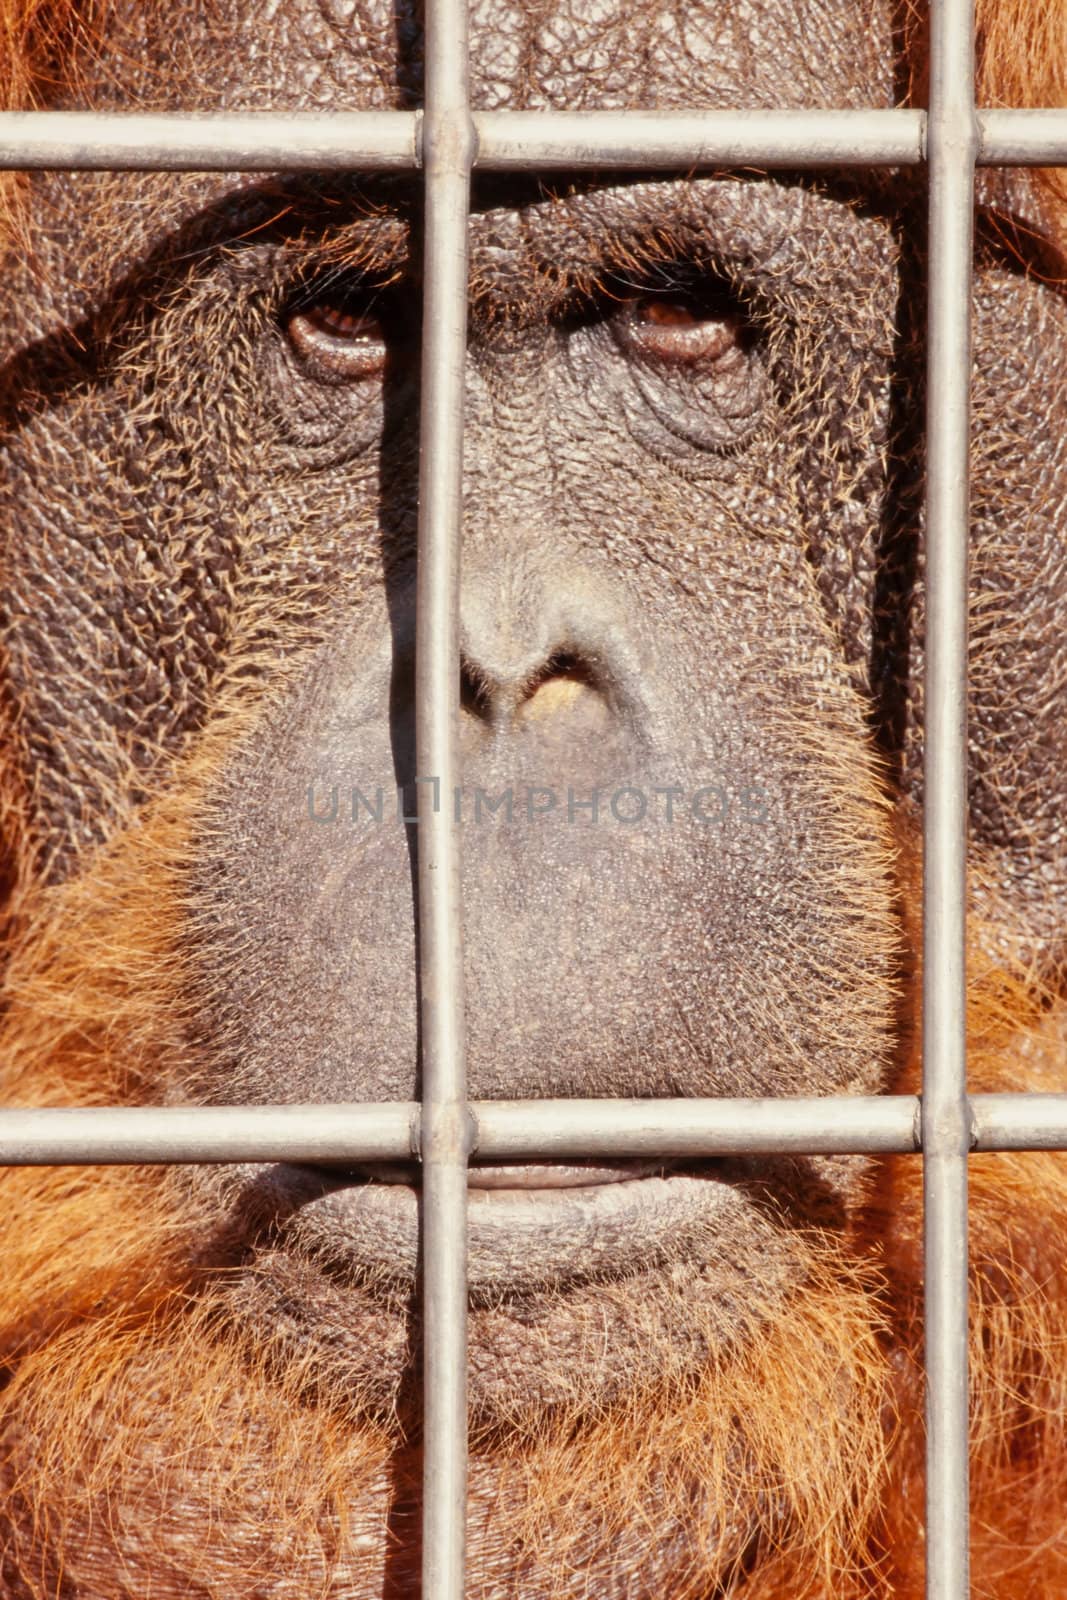 Orangutan watching from behind steel bars with sad expression on face.